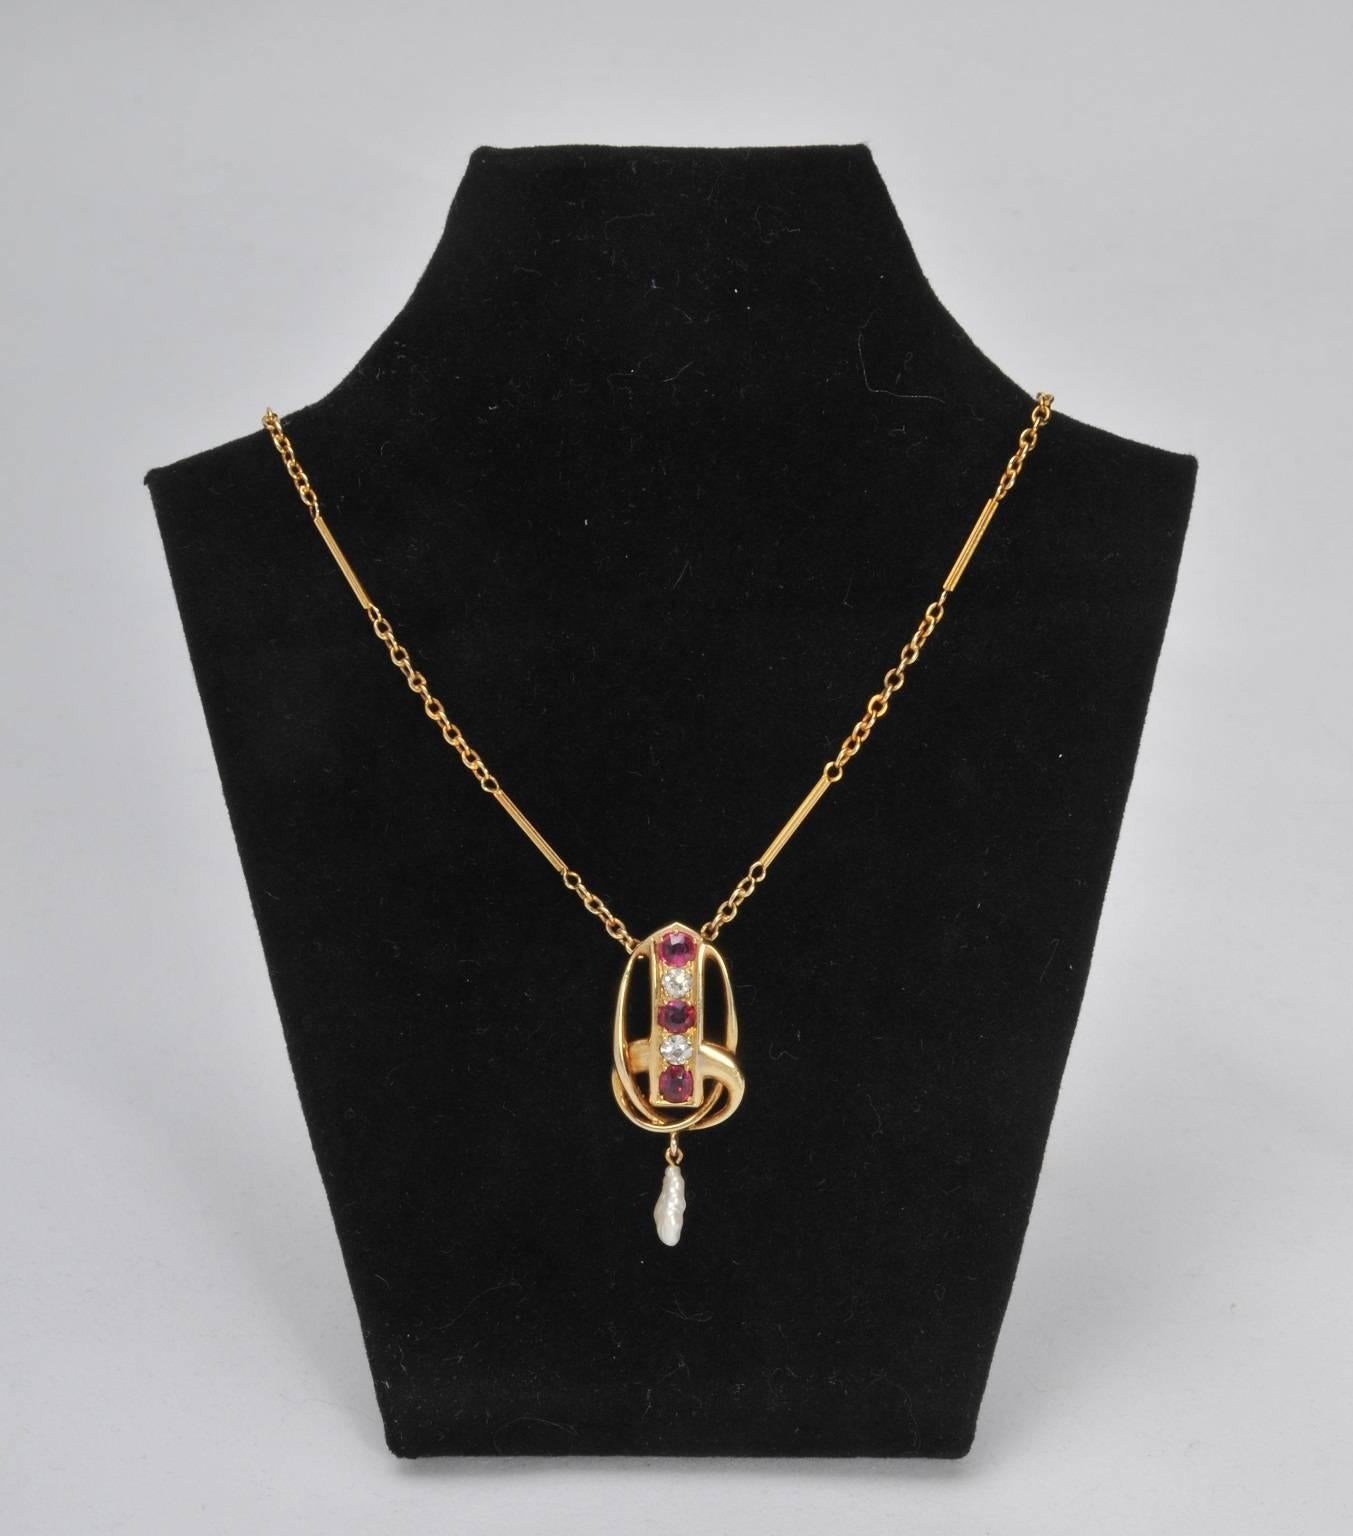 A stunning diamond and ruby 15ct gold pendant by Archibald Knox for Liberty & Co.  A variant of a pendant design like this can be seen in the Liberty sketch book and was sold previously by Tadema Gallery; Liberty sketch number 870.